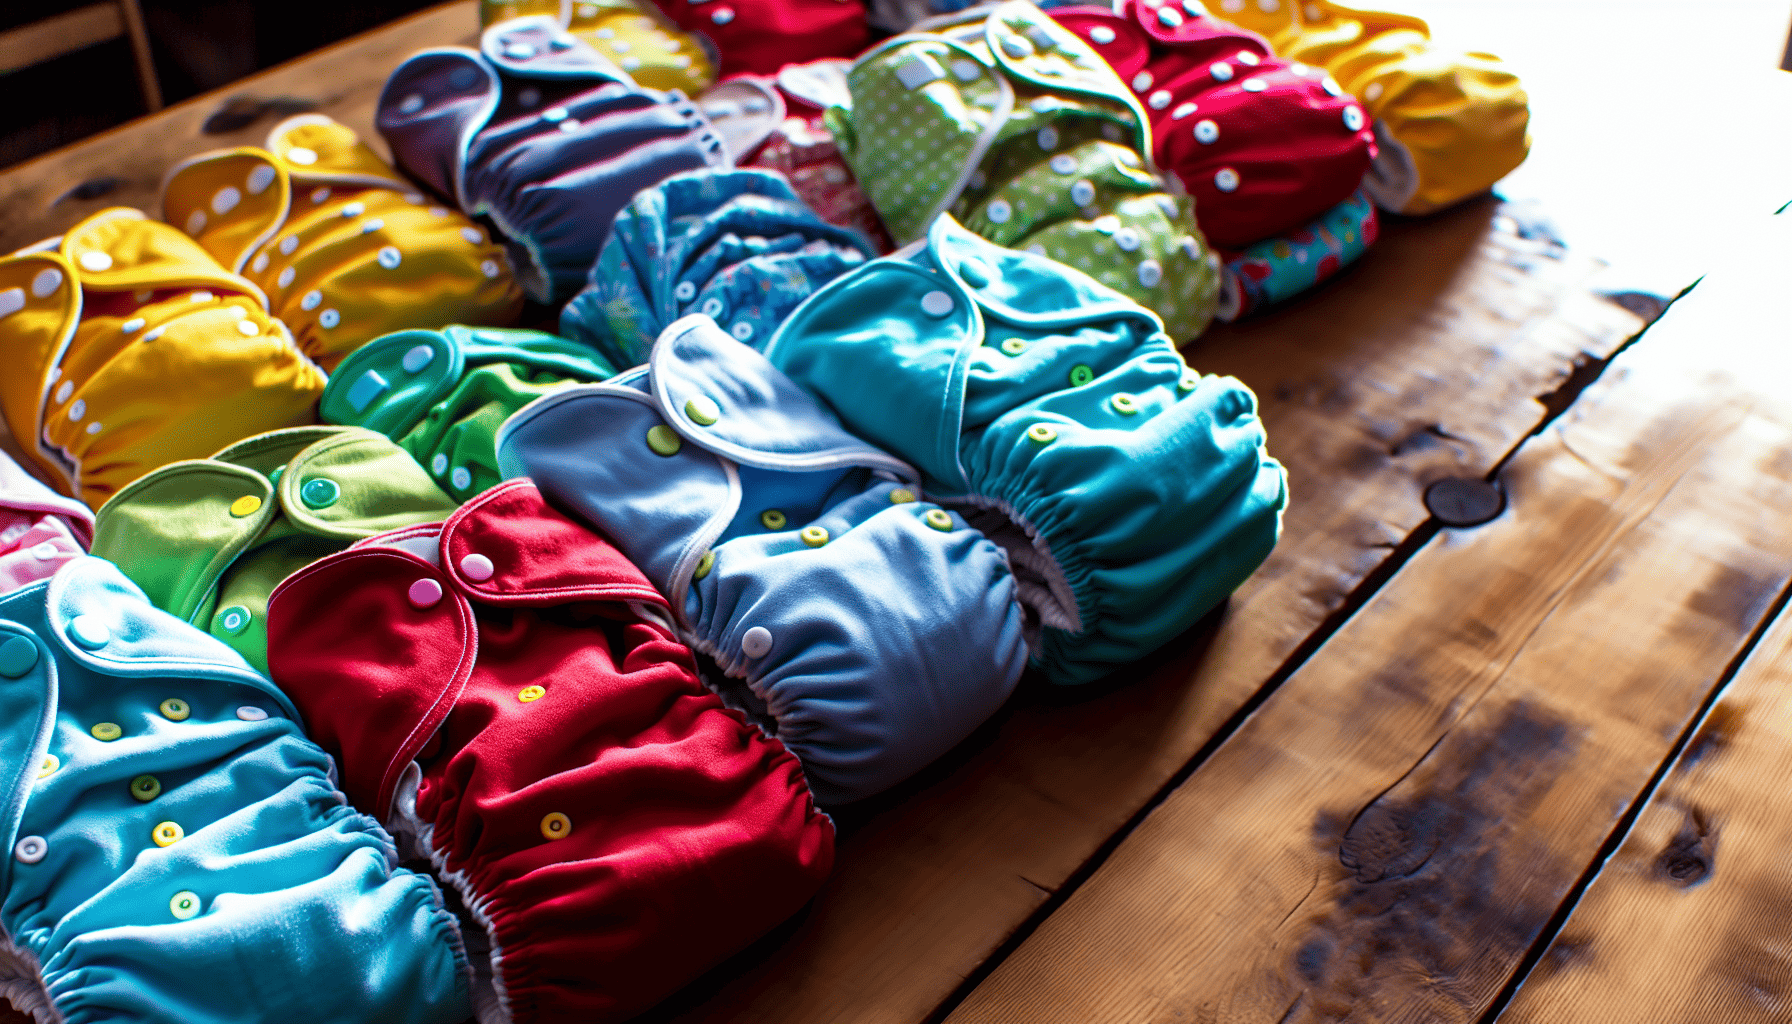 A pile of colorful cloth diapers